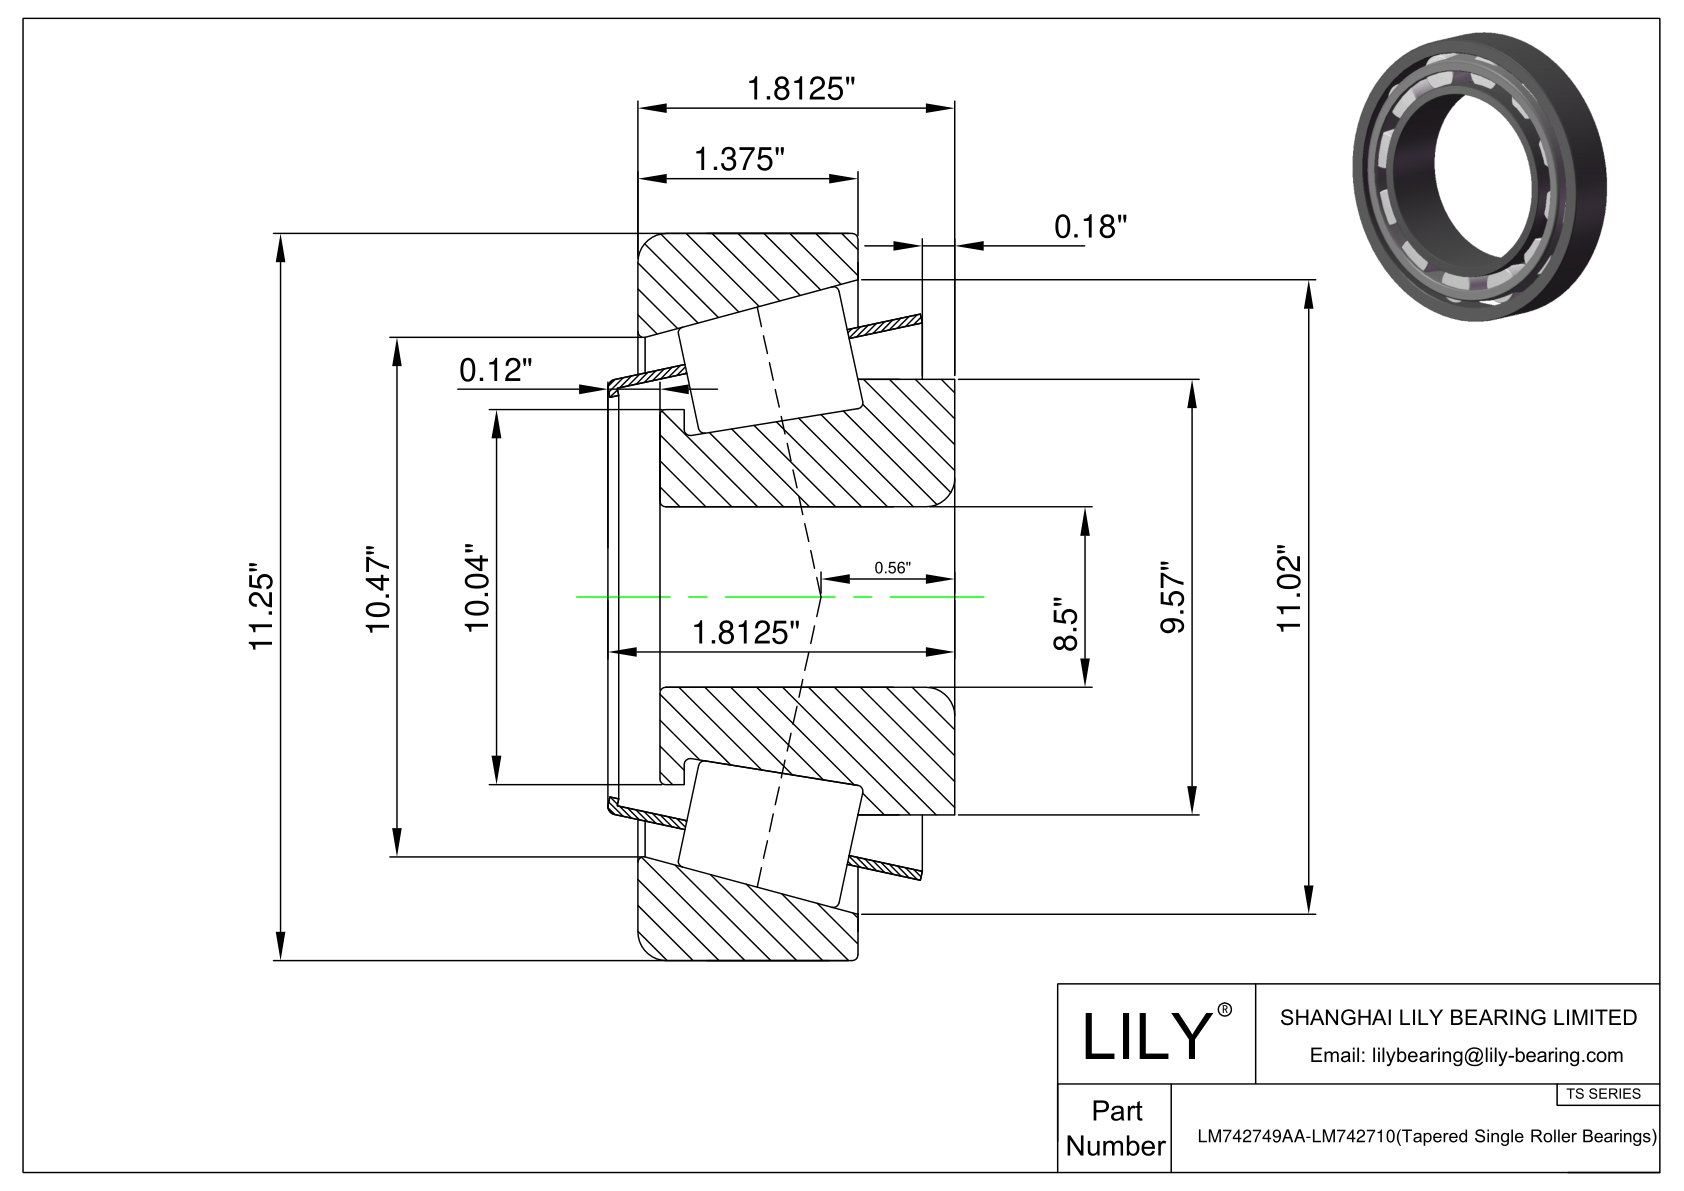 LM742749AA-LM742710 TS (Tapered Single Roller Bearings) (Imperial) cad drawing